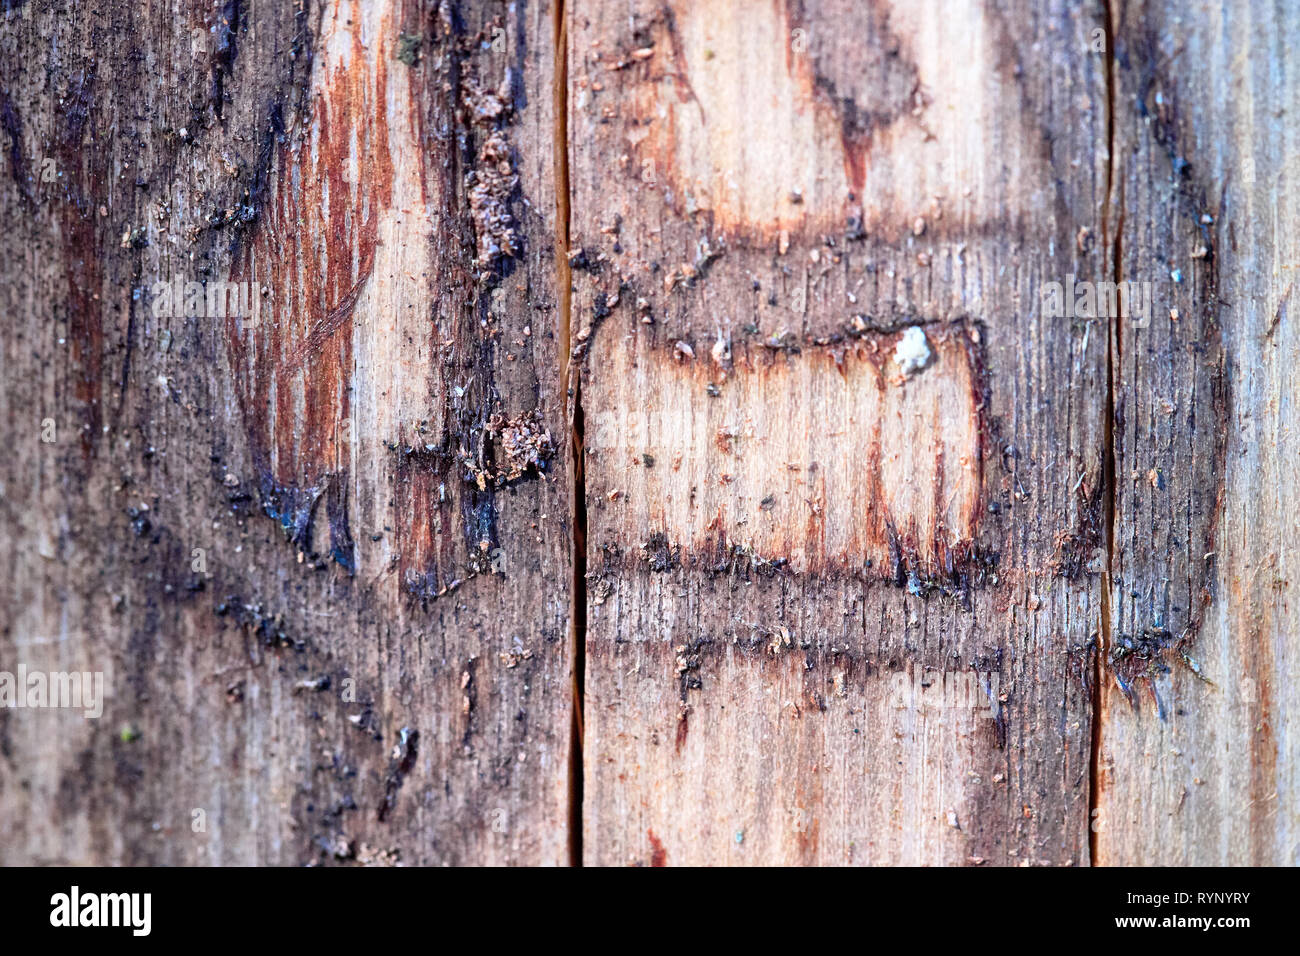 Pine tree wood eroded in wormholes suffers from bark beetle infection selected focus closeup texture background with copy space. Stock Photo